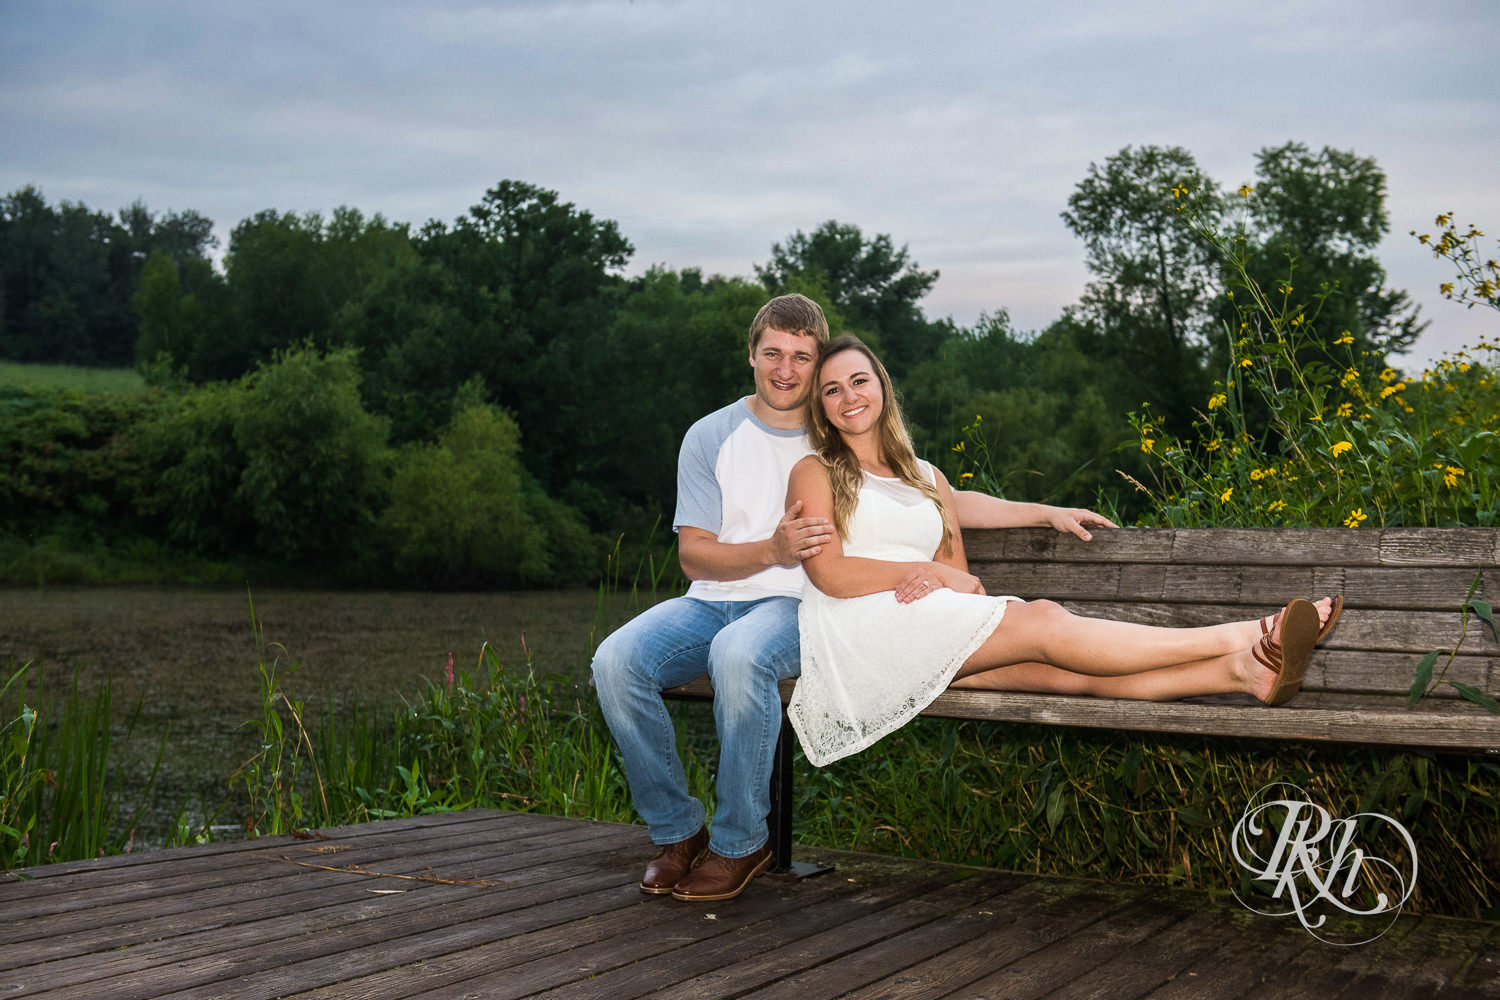 Man and woman smile on a bench at sunrise in Lebanon Hills Regional Park in Eagan, Minnesota.